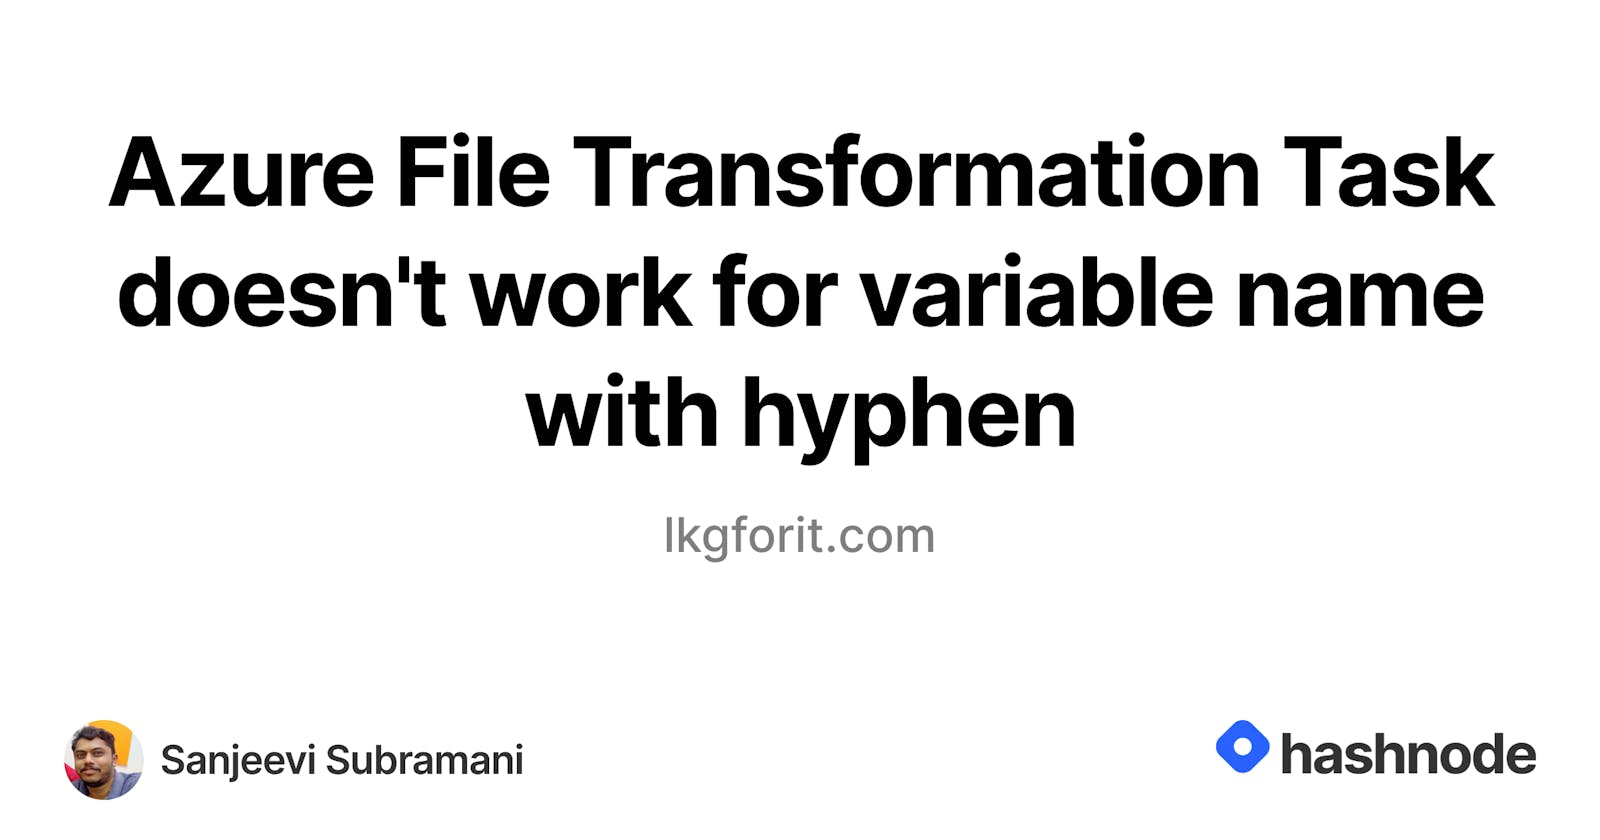 Azure File Transformation Task doesn't work for variable name with hyphen